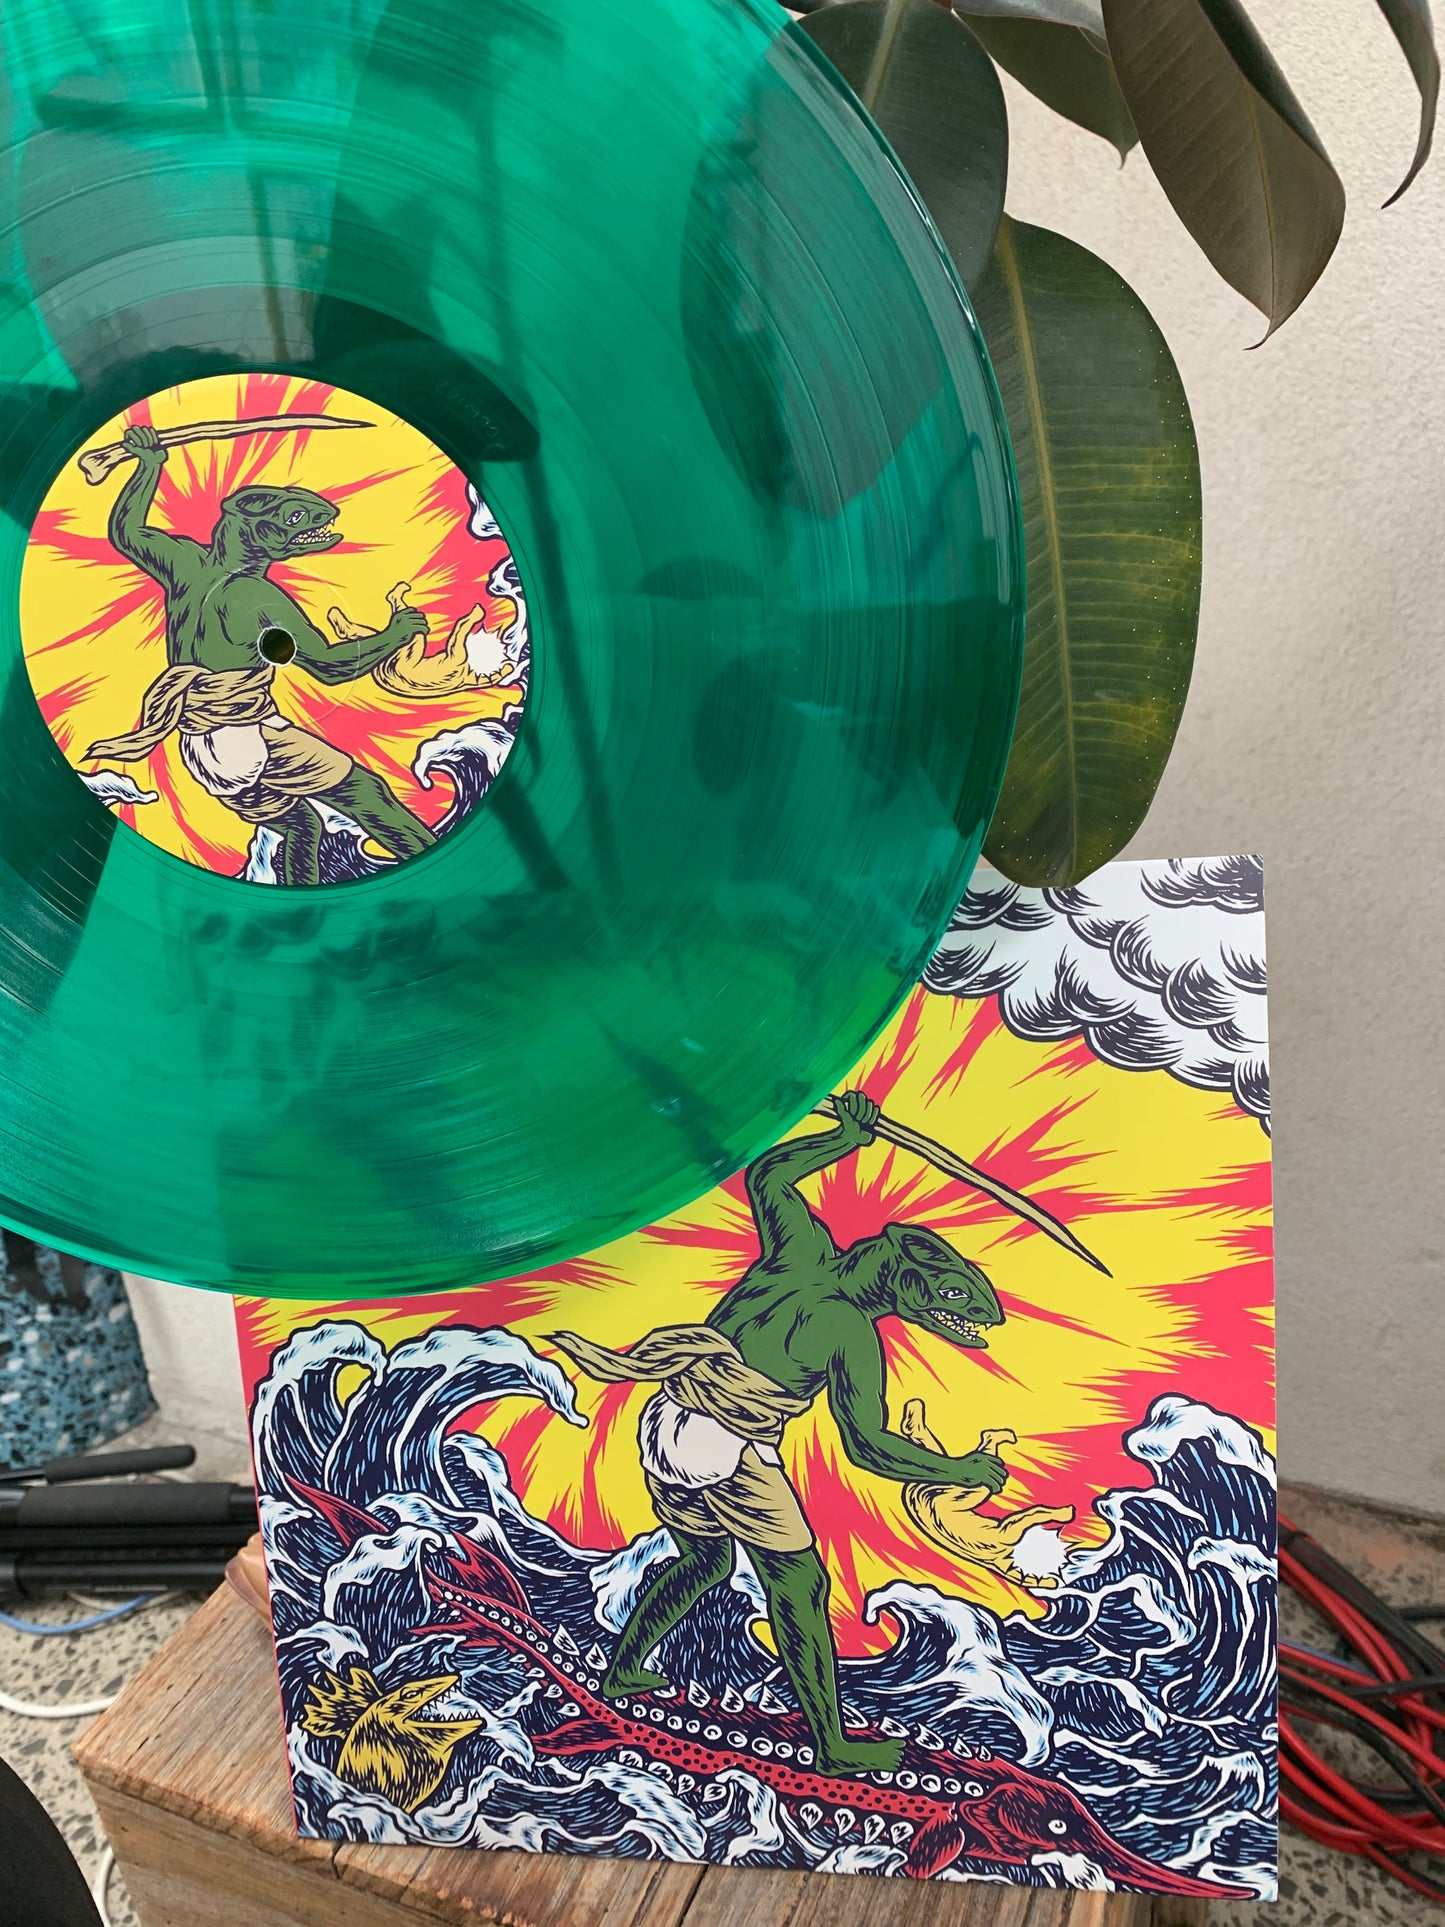 TEENAGE GIZZARD 12" Green Vinyl (Bootleg by Magnetic South)